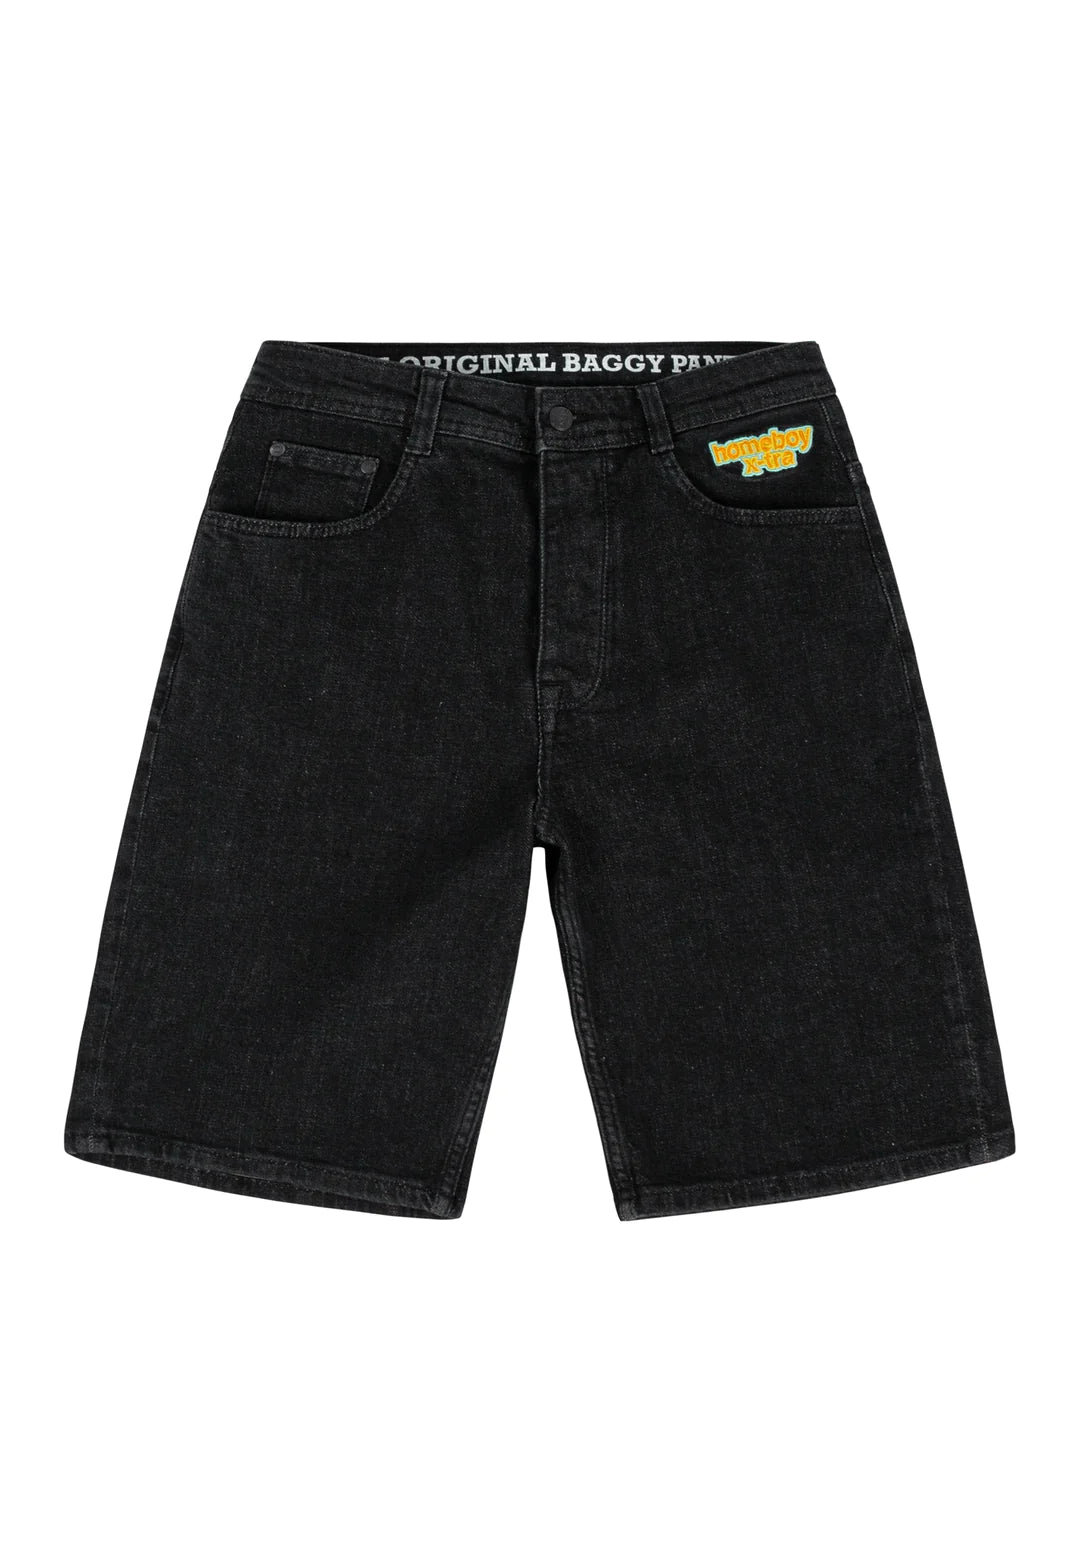 X-TRA BAGGY SHORT WASHED BLACK